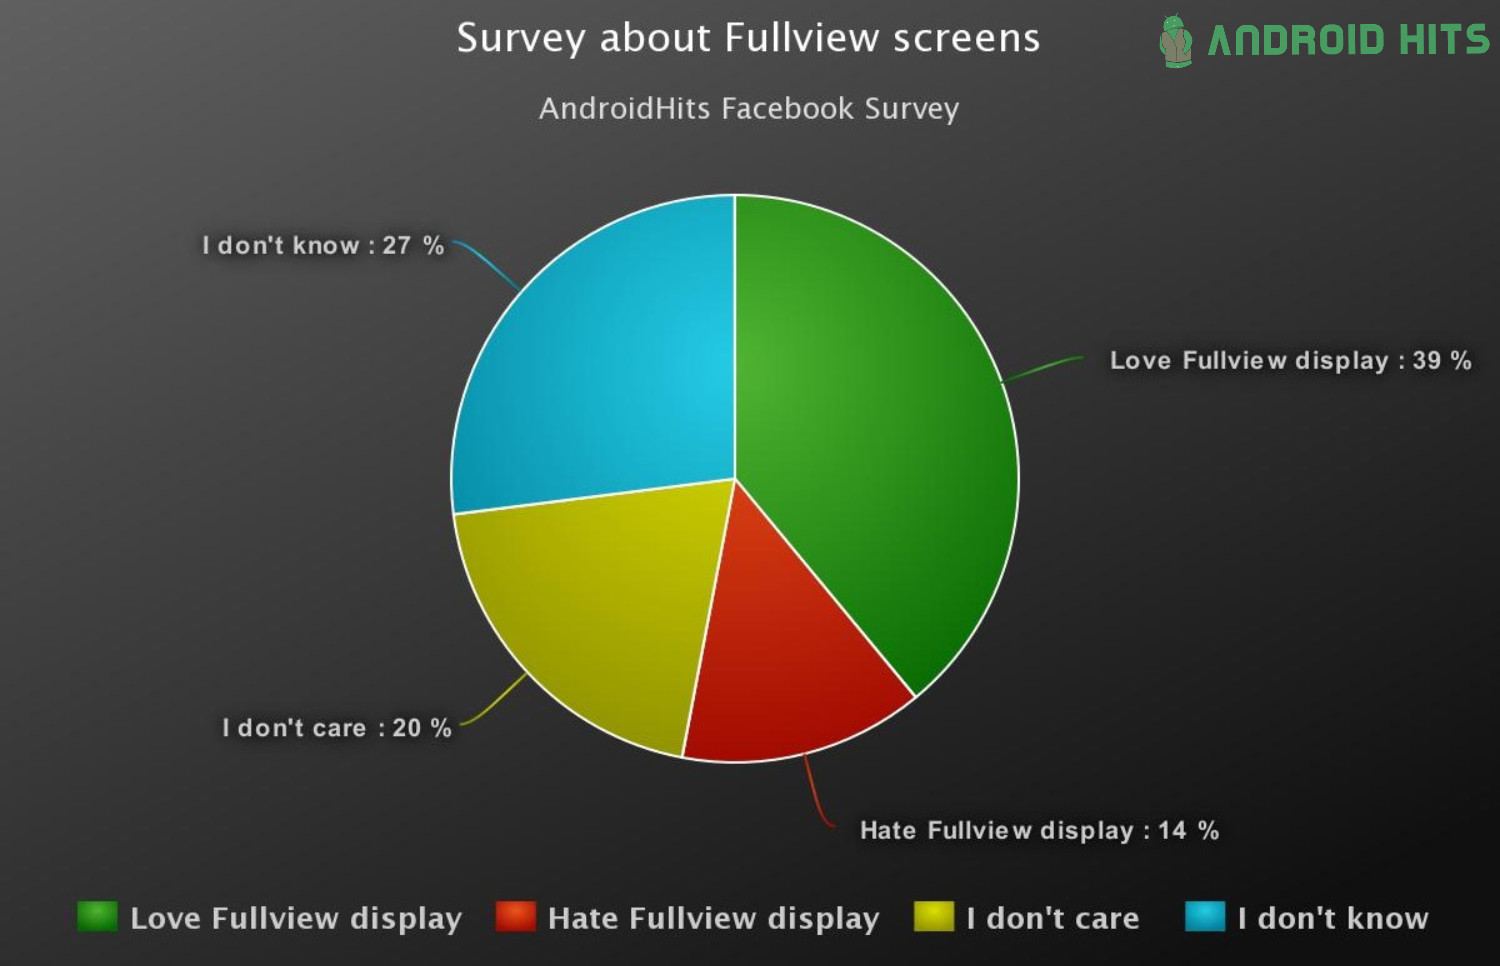 AndroidHits survey about fullview displays